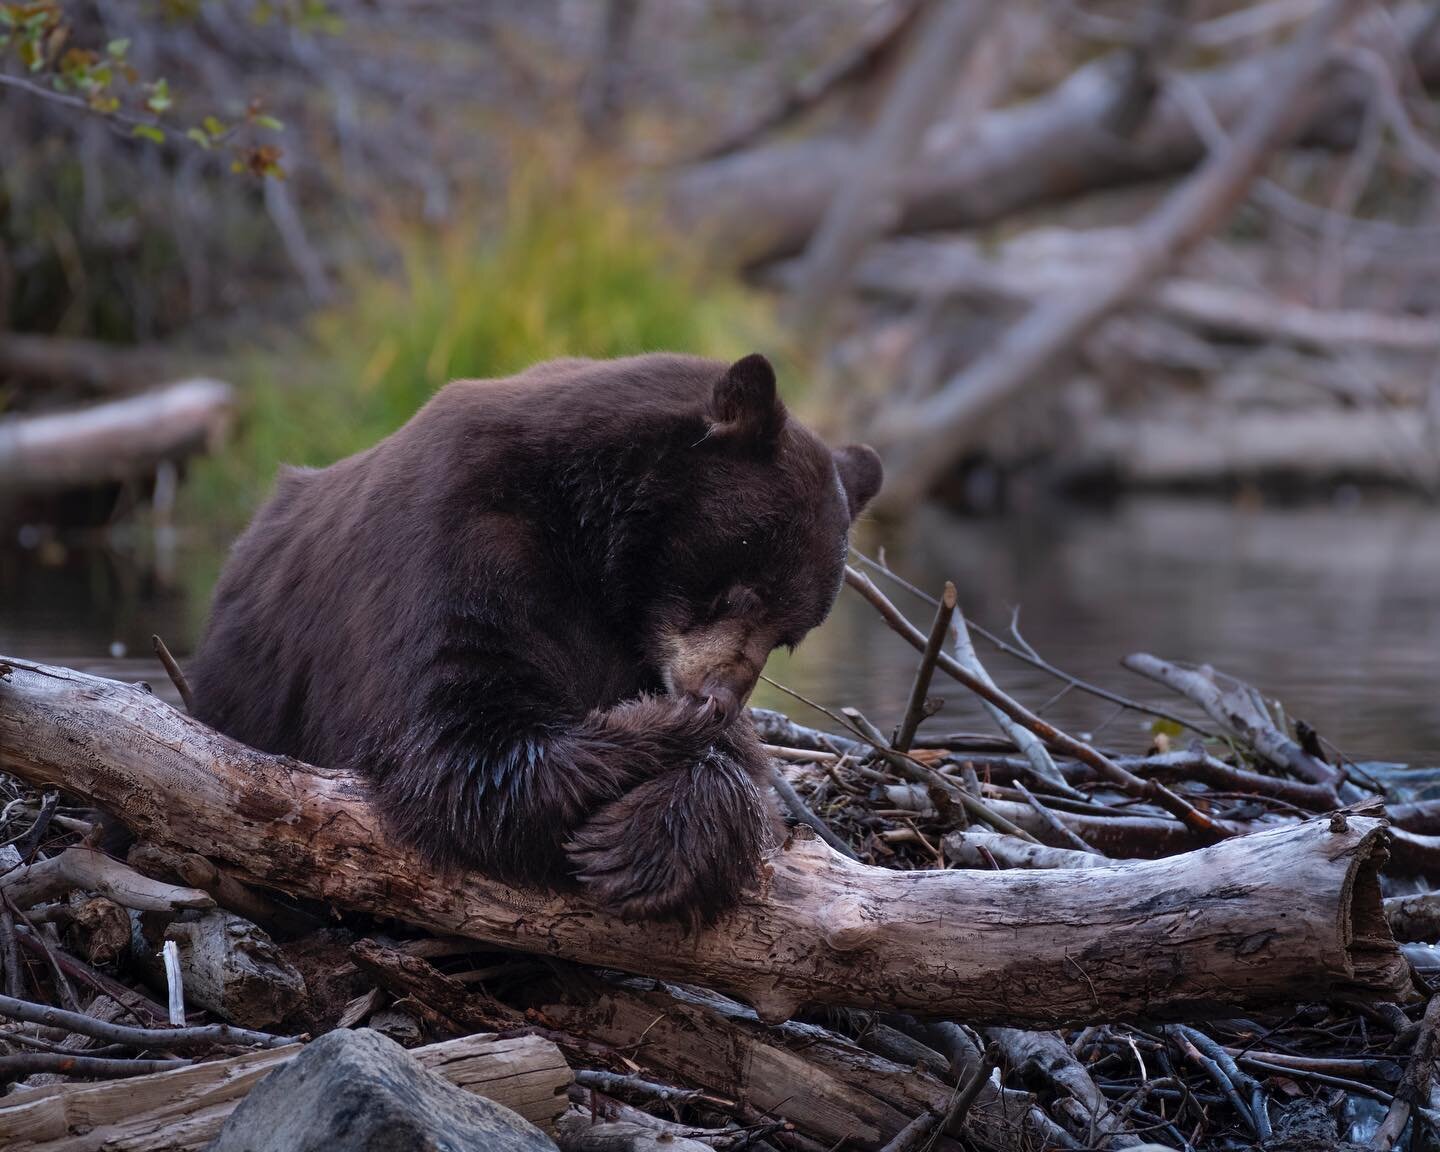 A black bear relaxes on some woody debris, picking the leftover morsels of salmon out of it big paws.